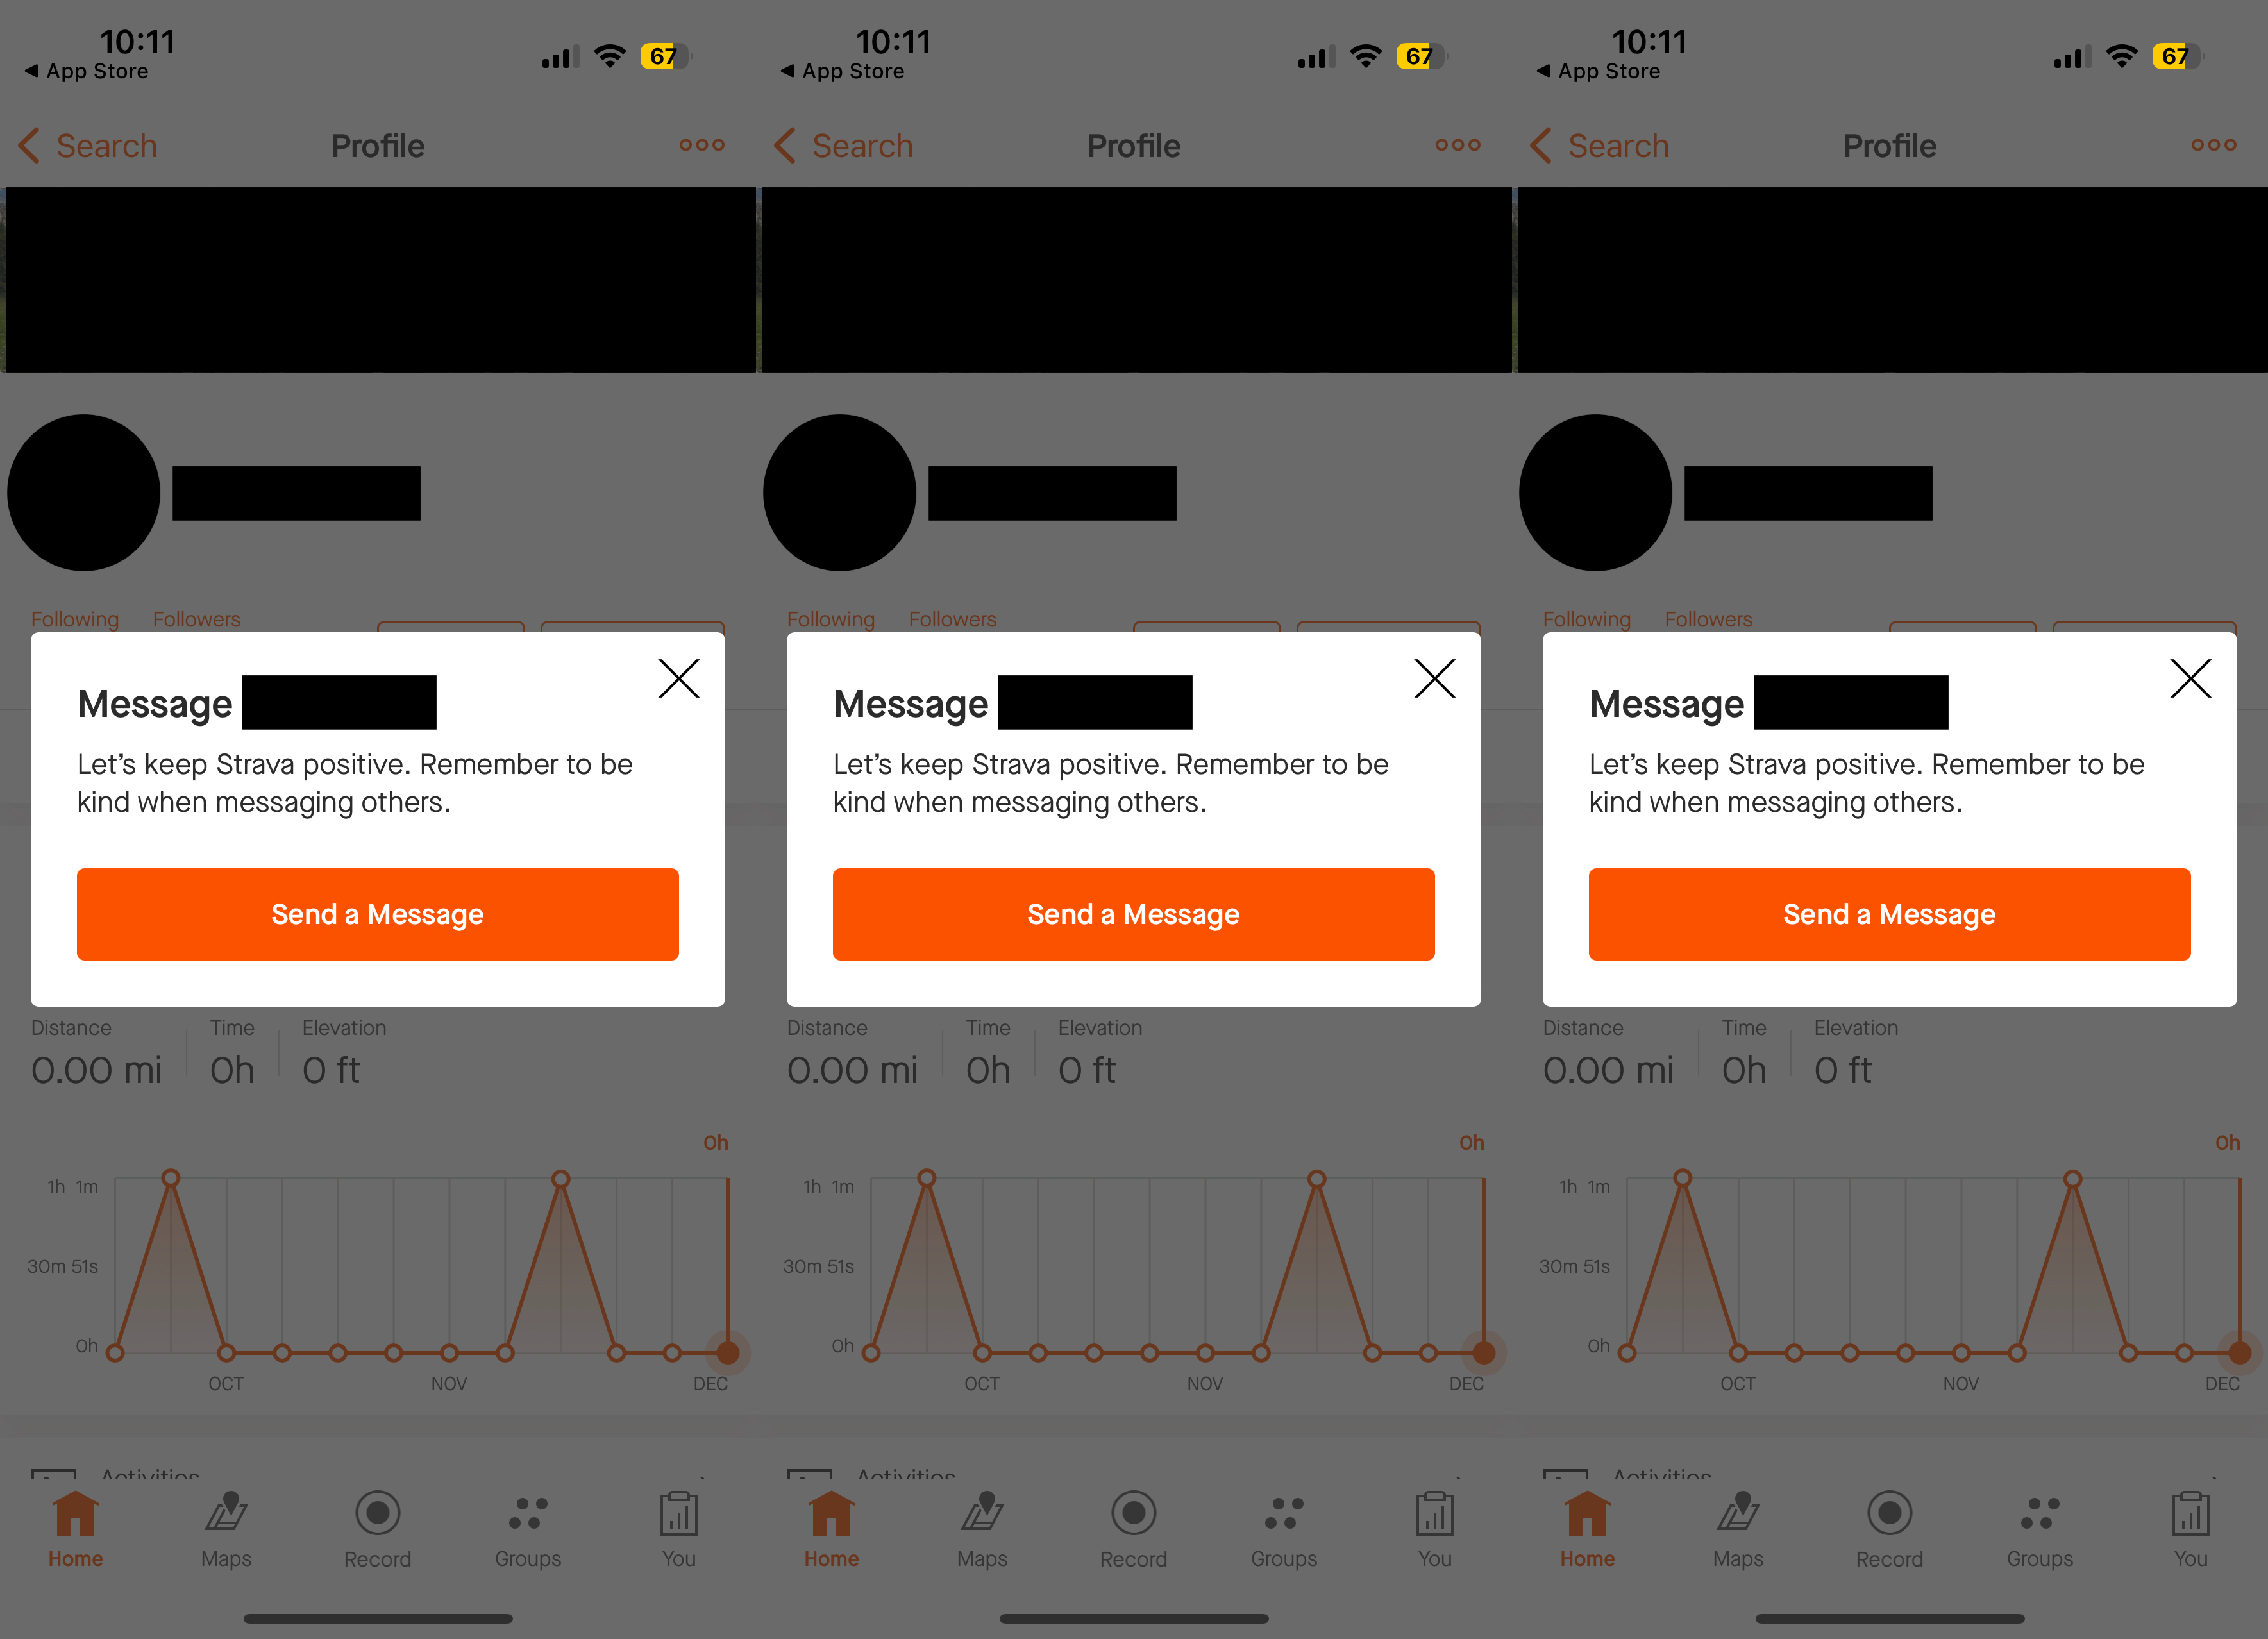 How to send messages on Strava